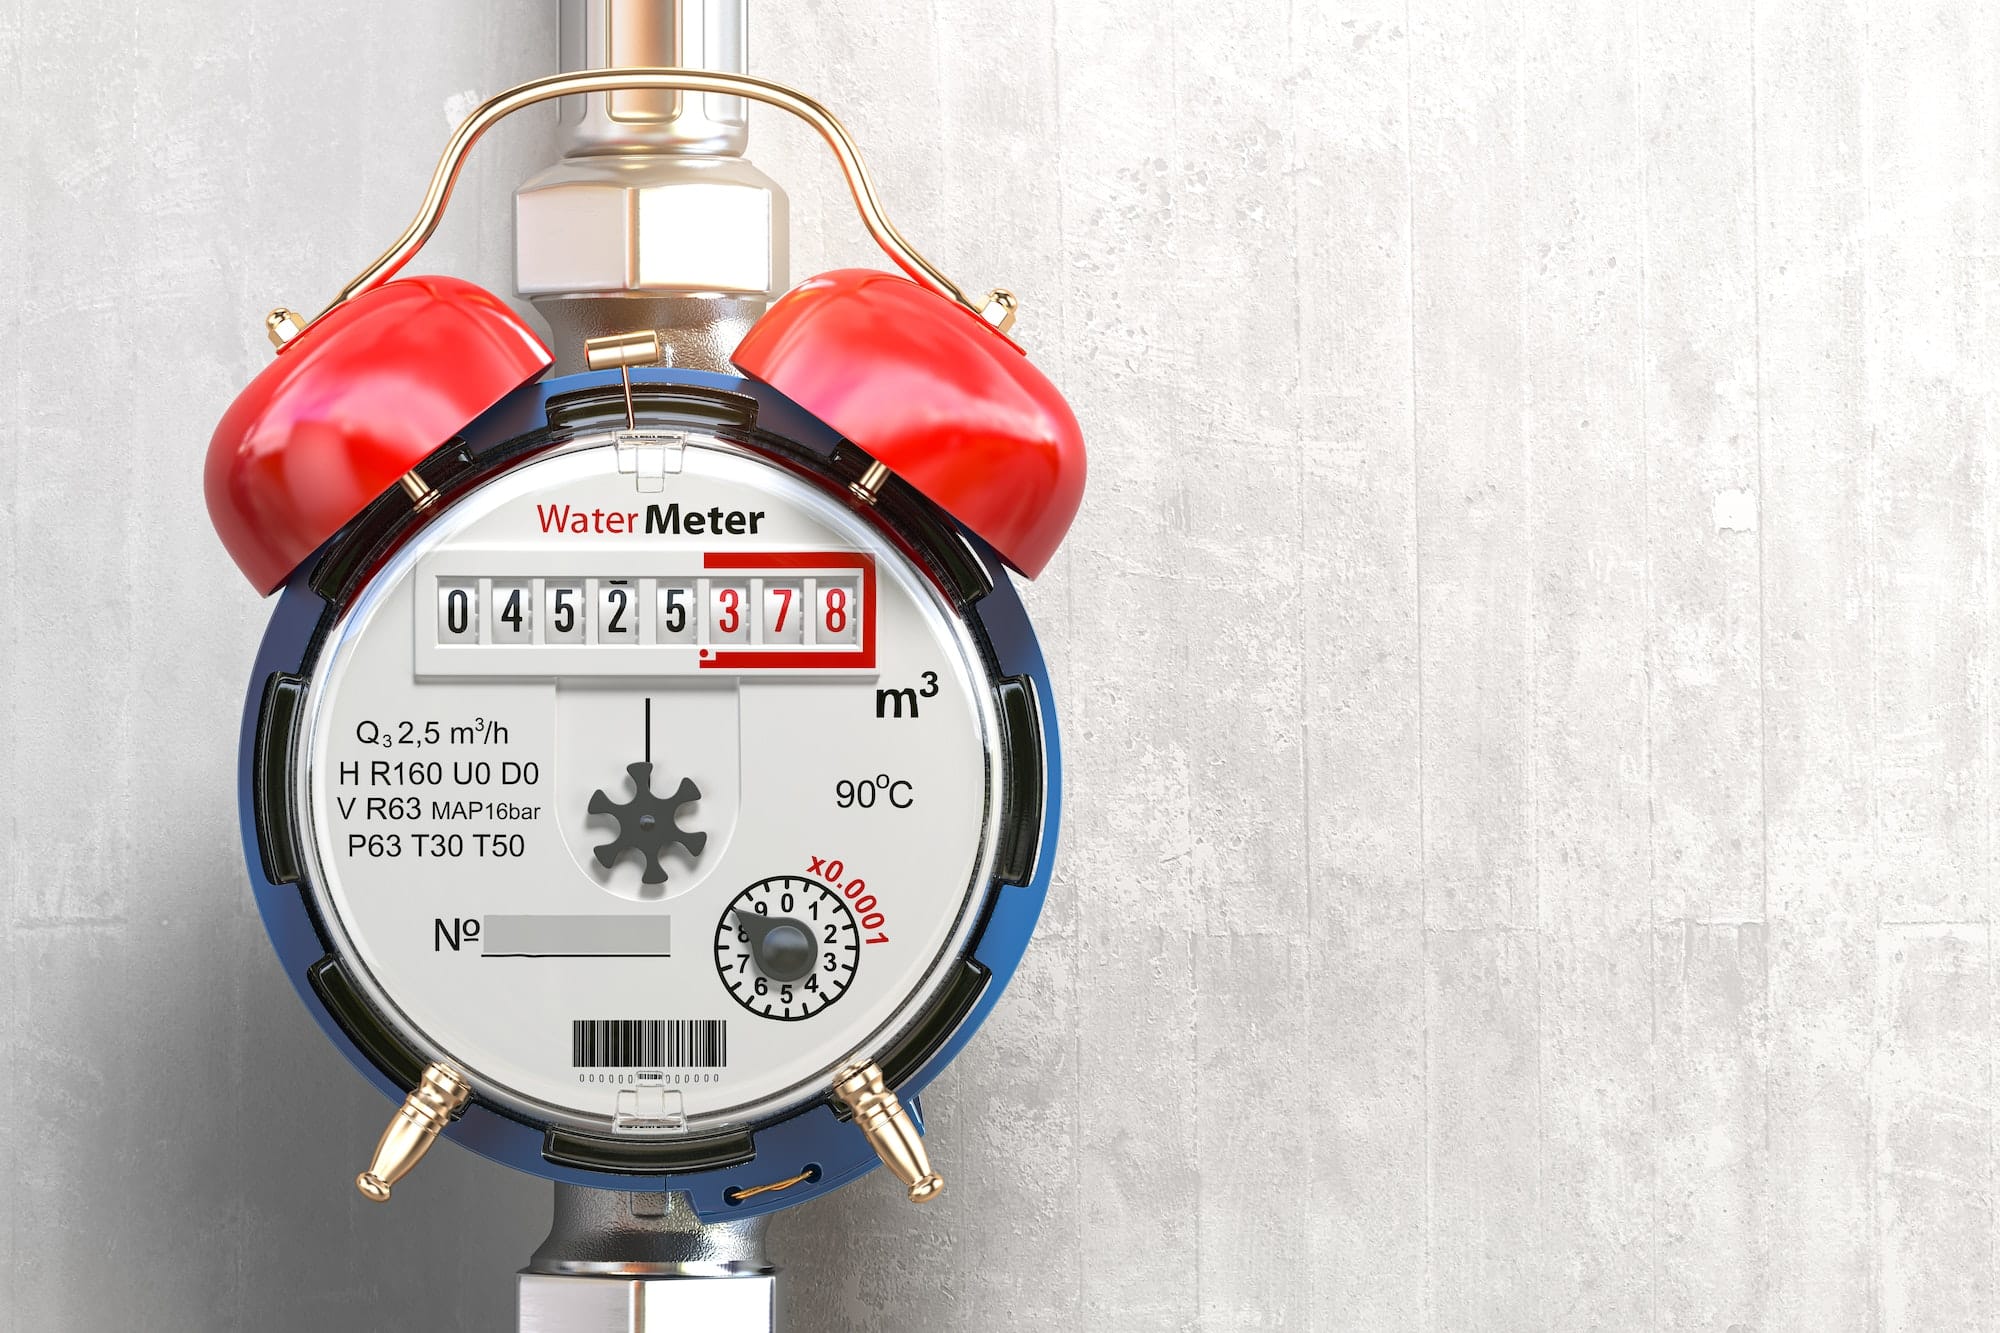 Water meter wiith alarm clock. Time to pay utility bills and debt for water consumption concept.